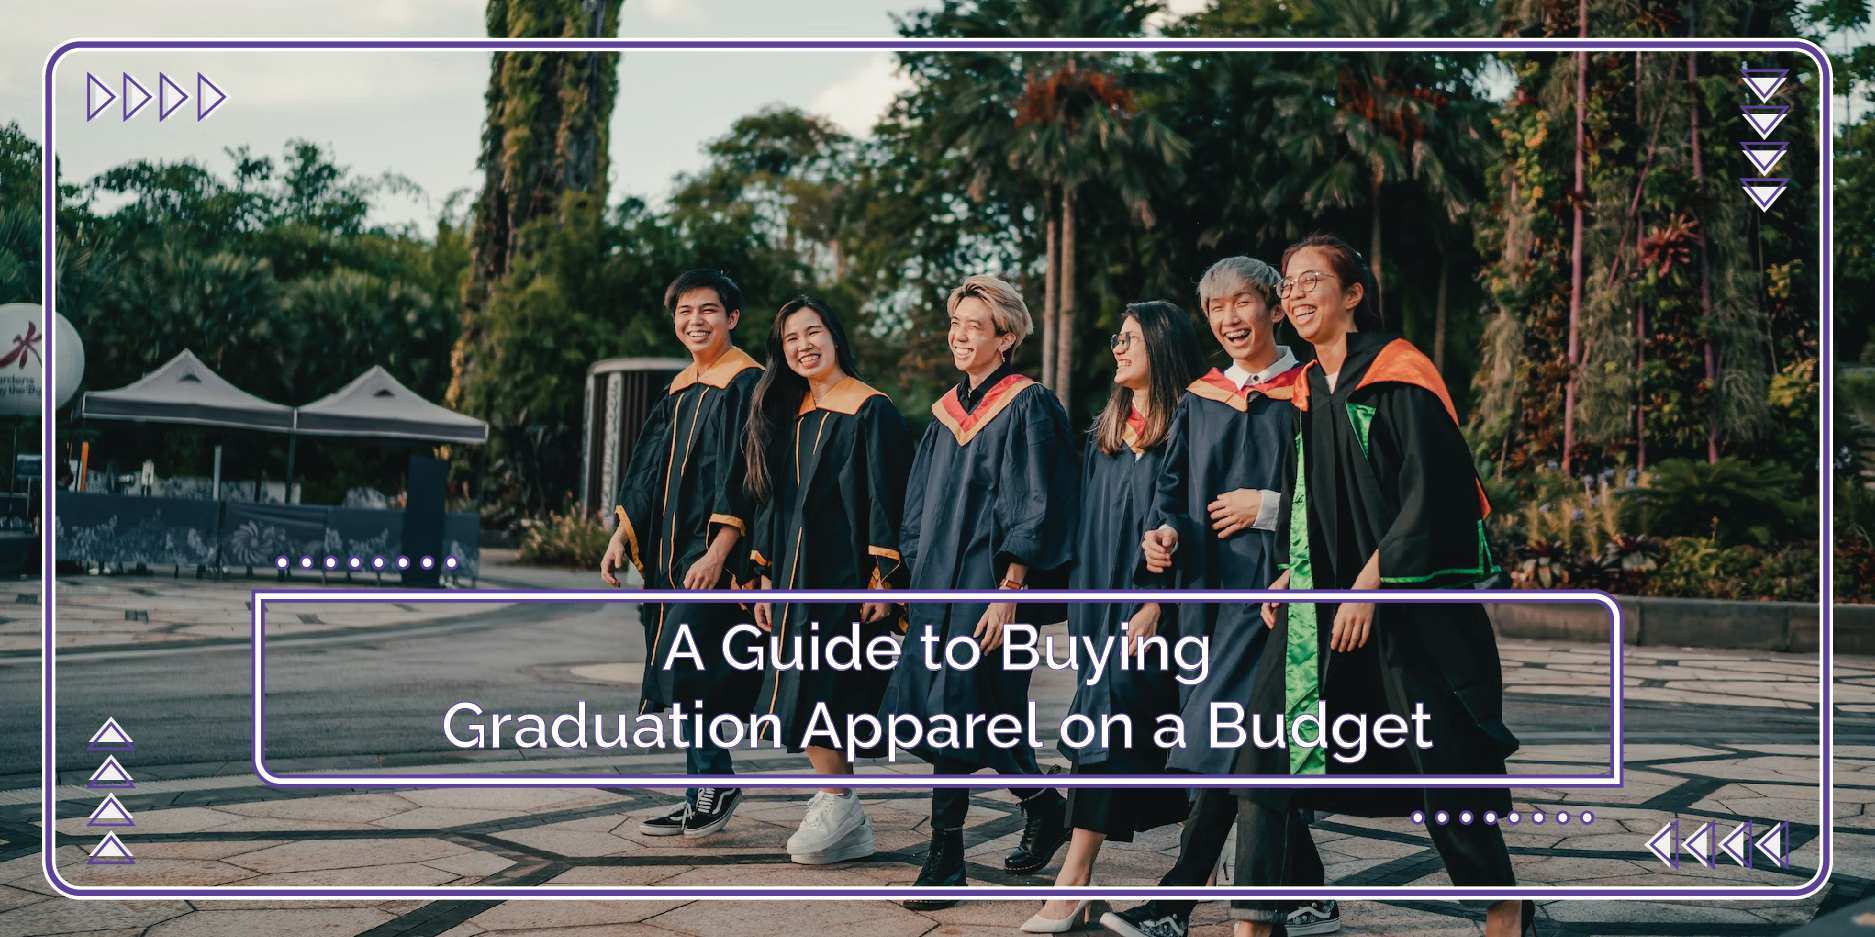 A Guide to Buying Graduation Apparel on a Budget